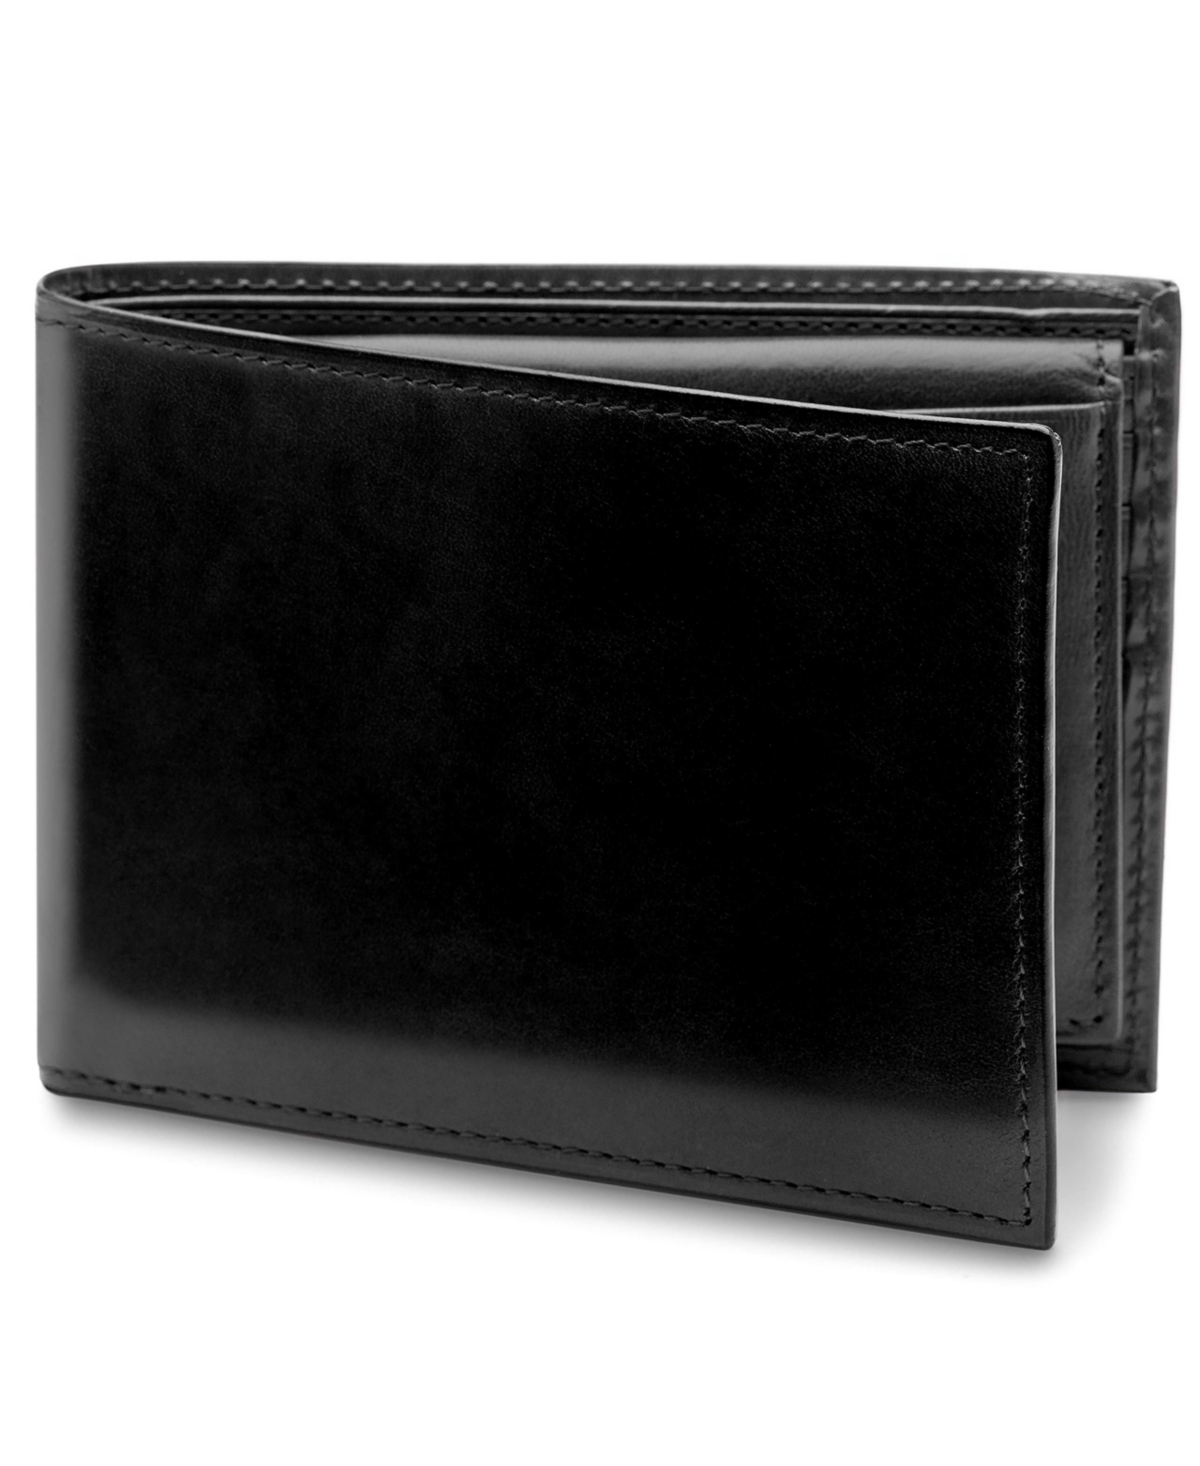 Mens Old Leather Credit Wallet w/Id Passcase - Black